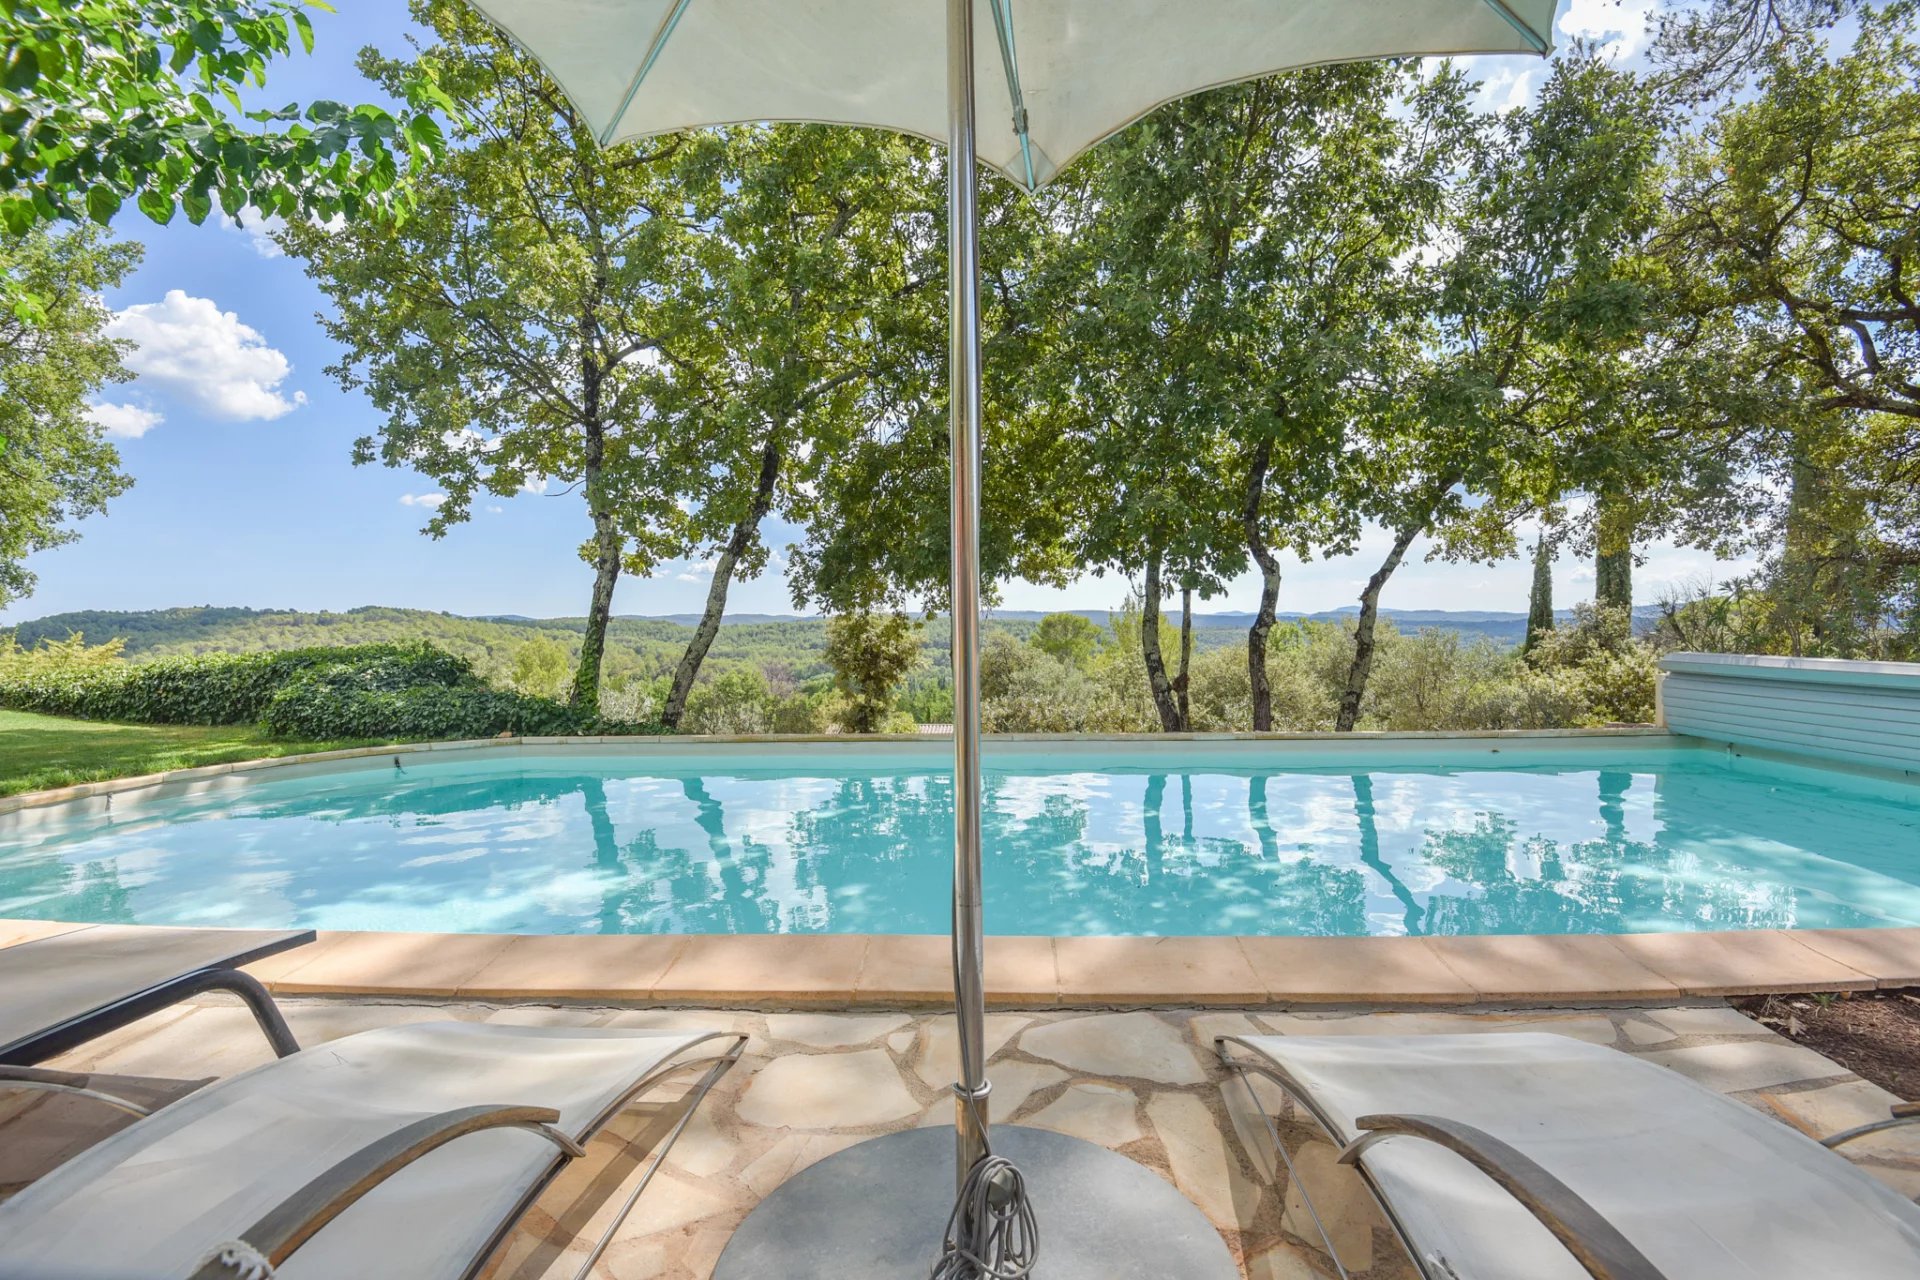 Stylish achitect villa settled in a green paradise with beautiful panoramic views.